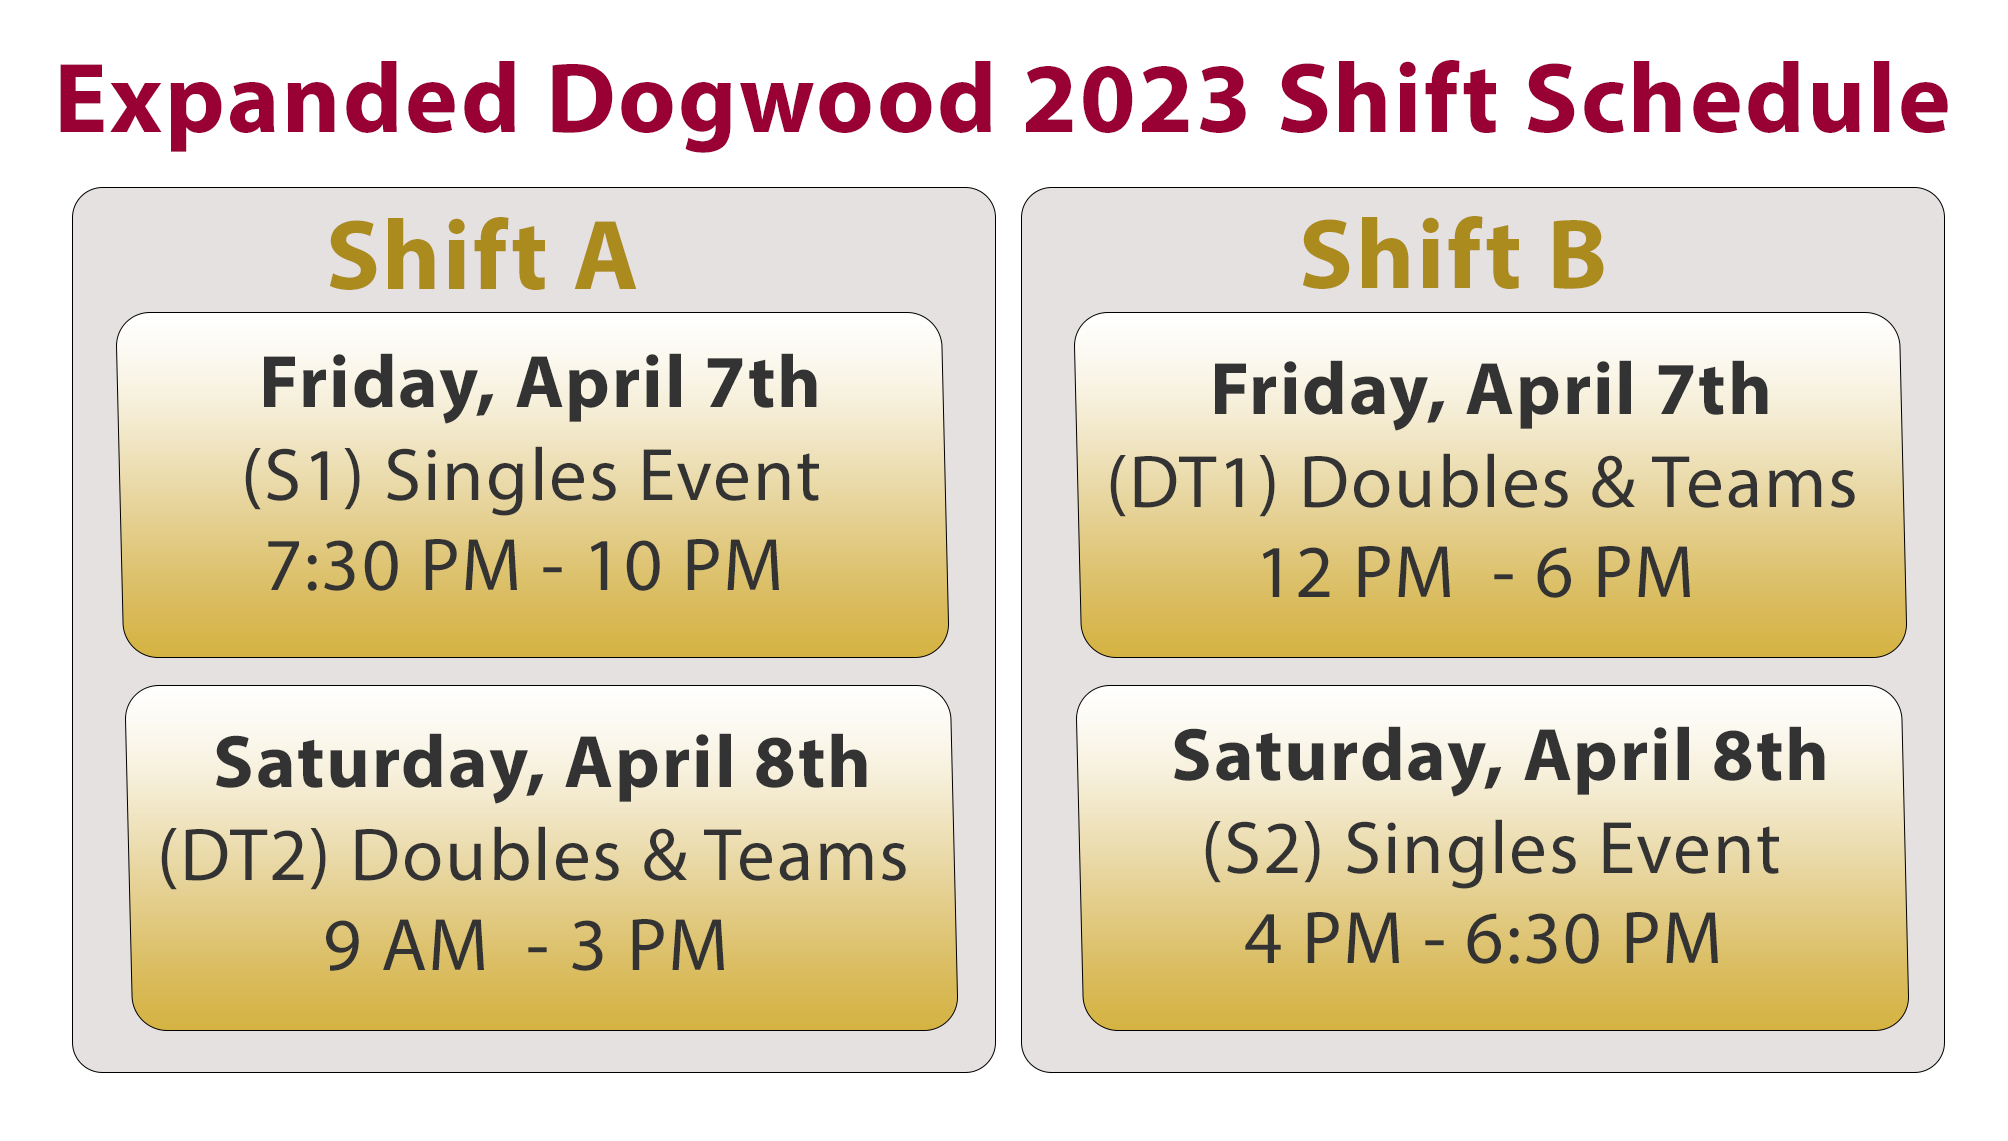 Dogwood Registration Sells Out in 18 Hours Announces Expanded Shift